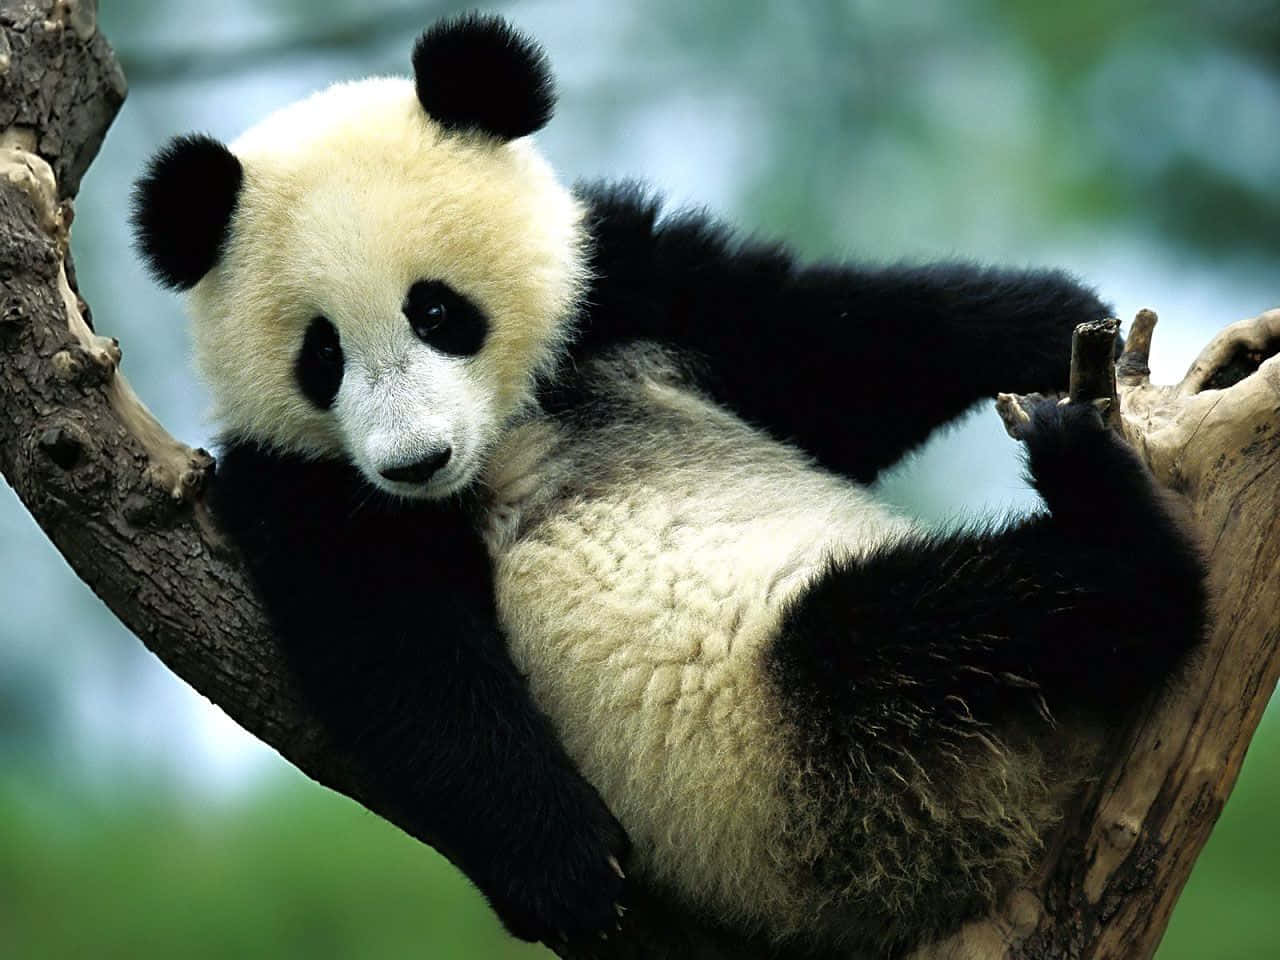 An Illustration of A Giant Panda in its Natural Habitat